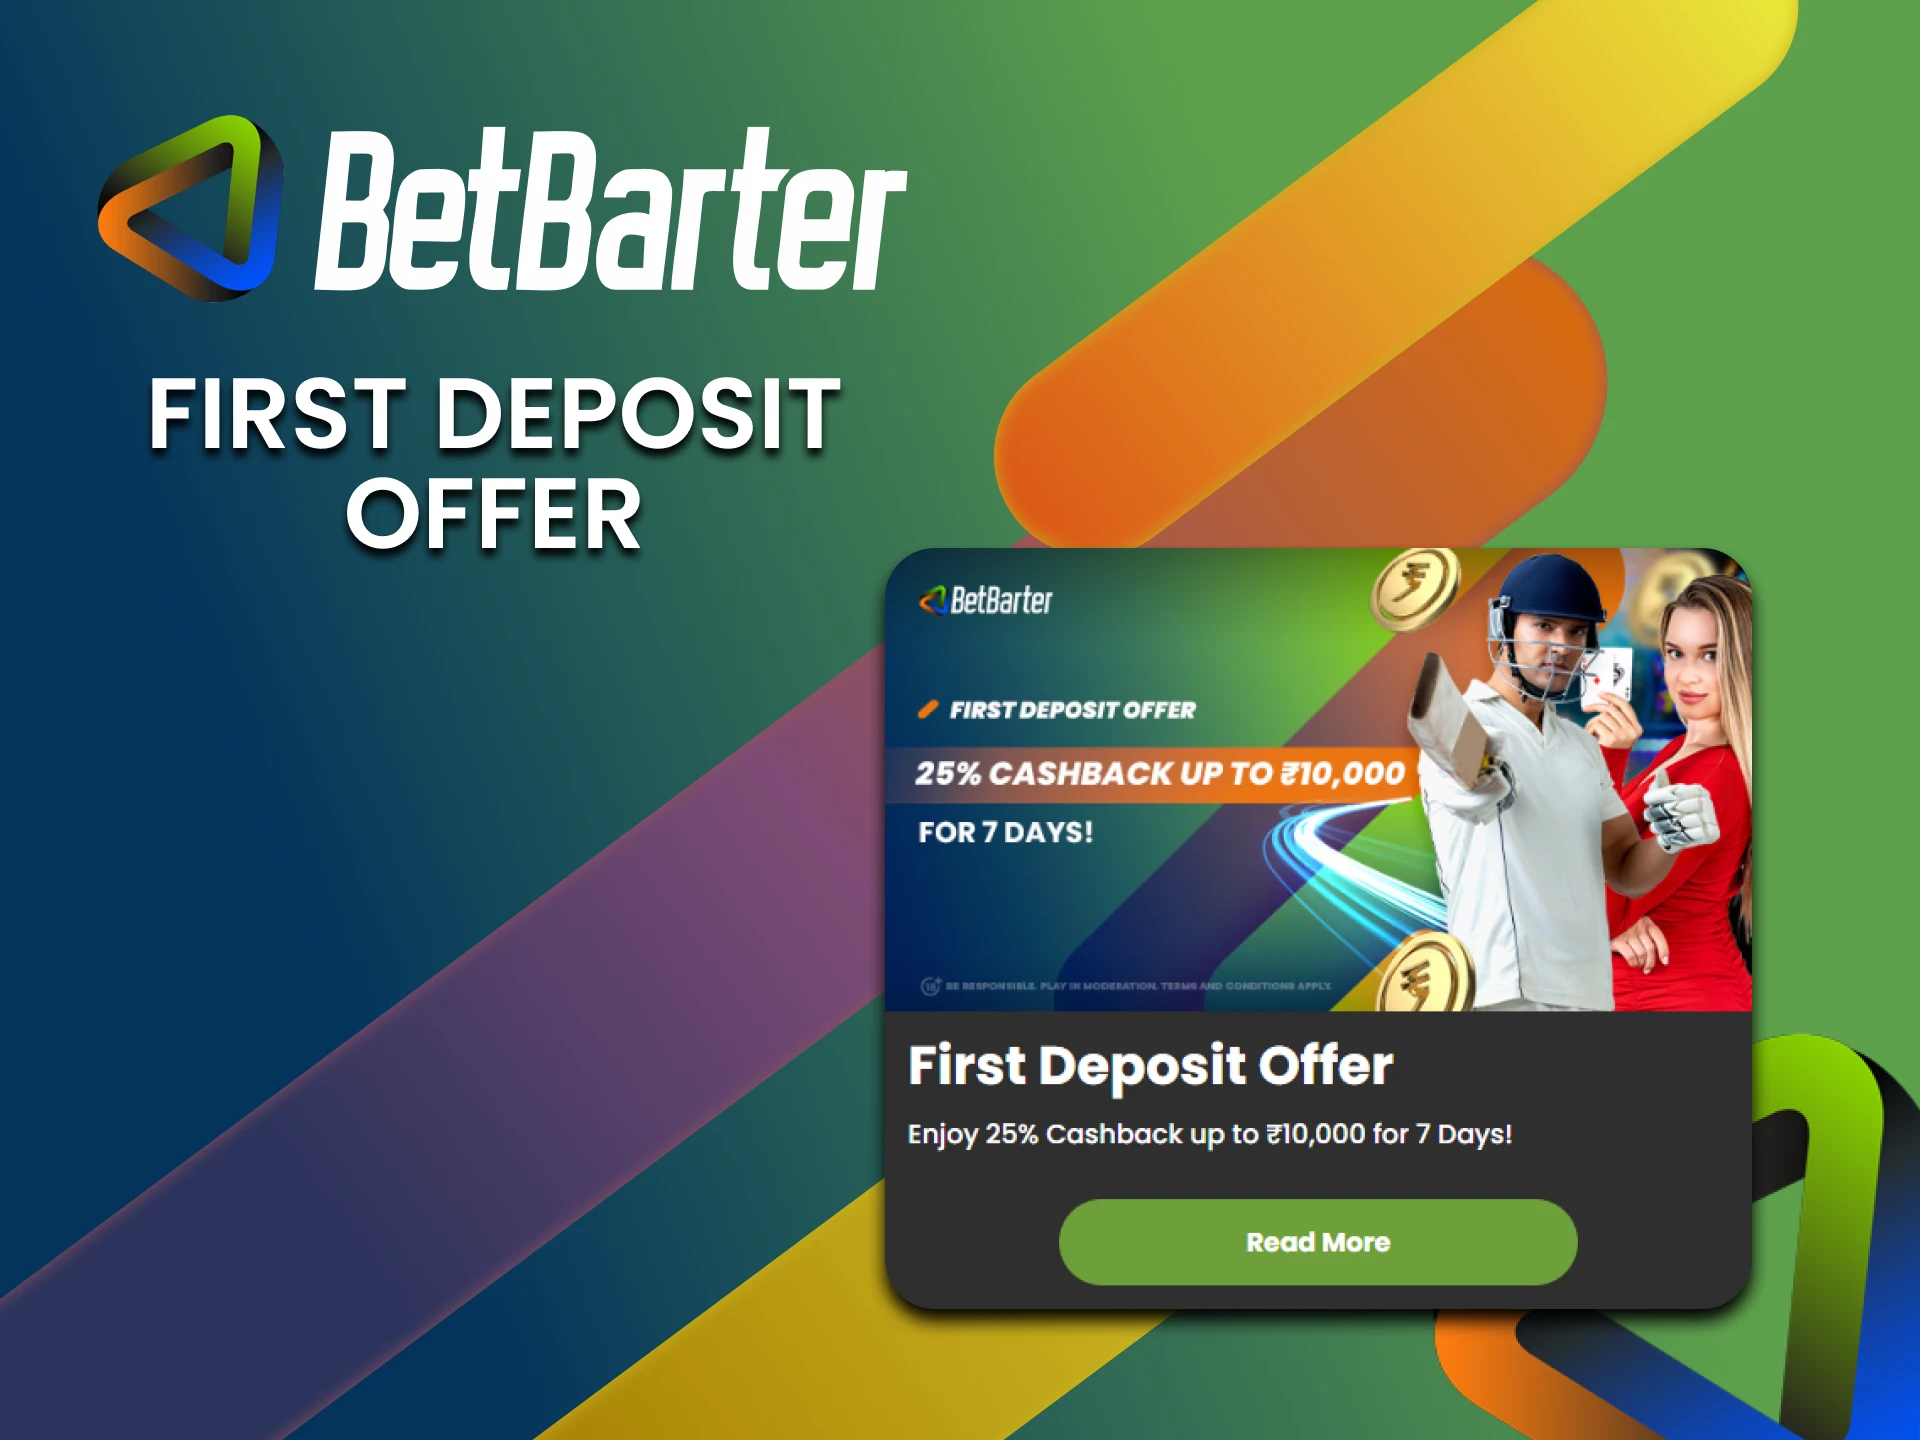 When you sign up, you'll receive a special welcome bonus from BetBarter that will go a long way in helping you get started betting.